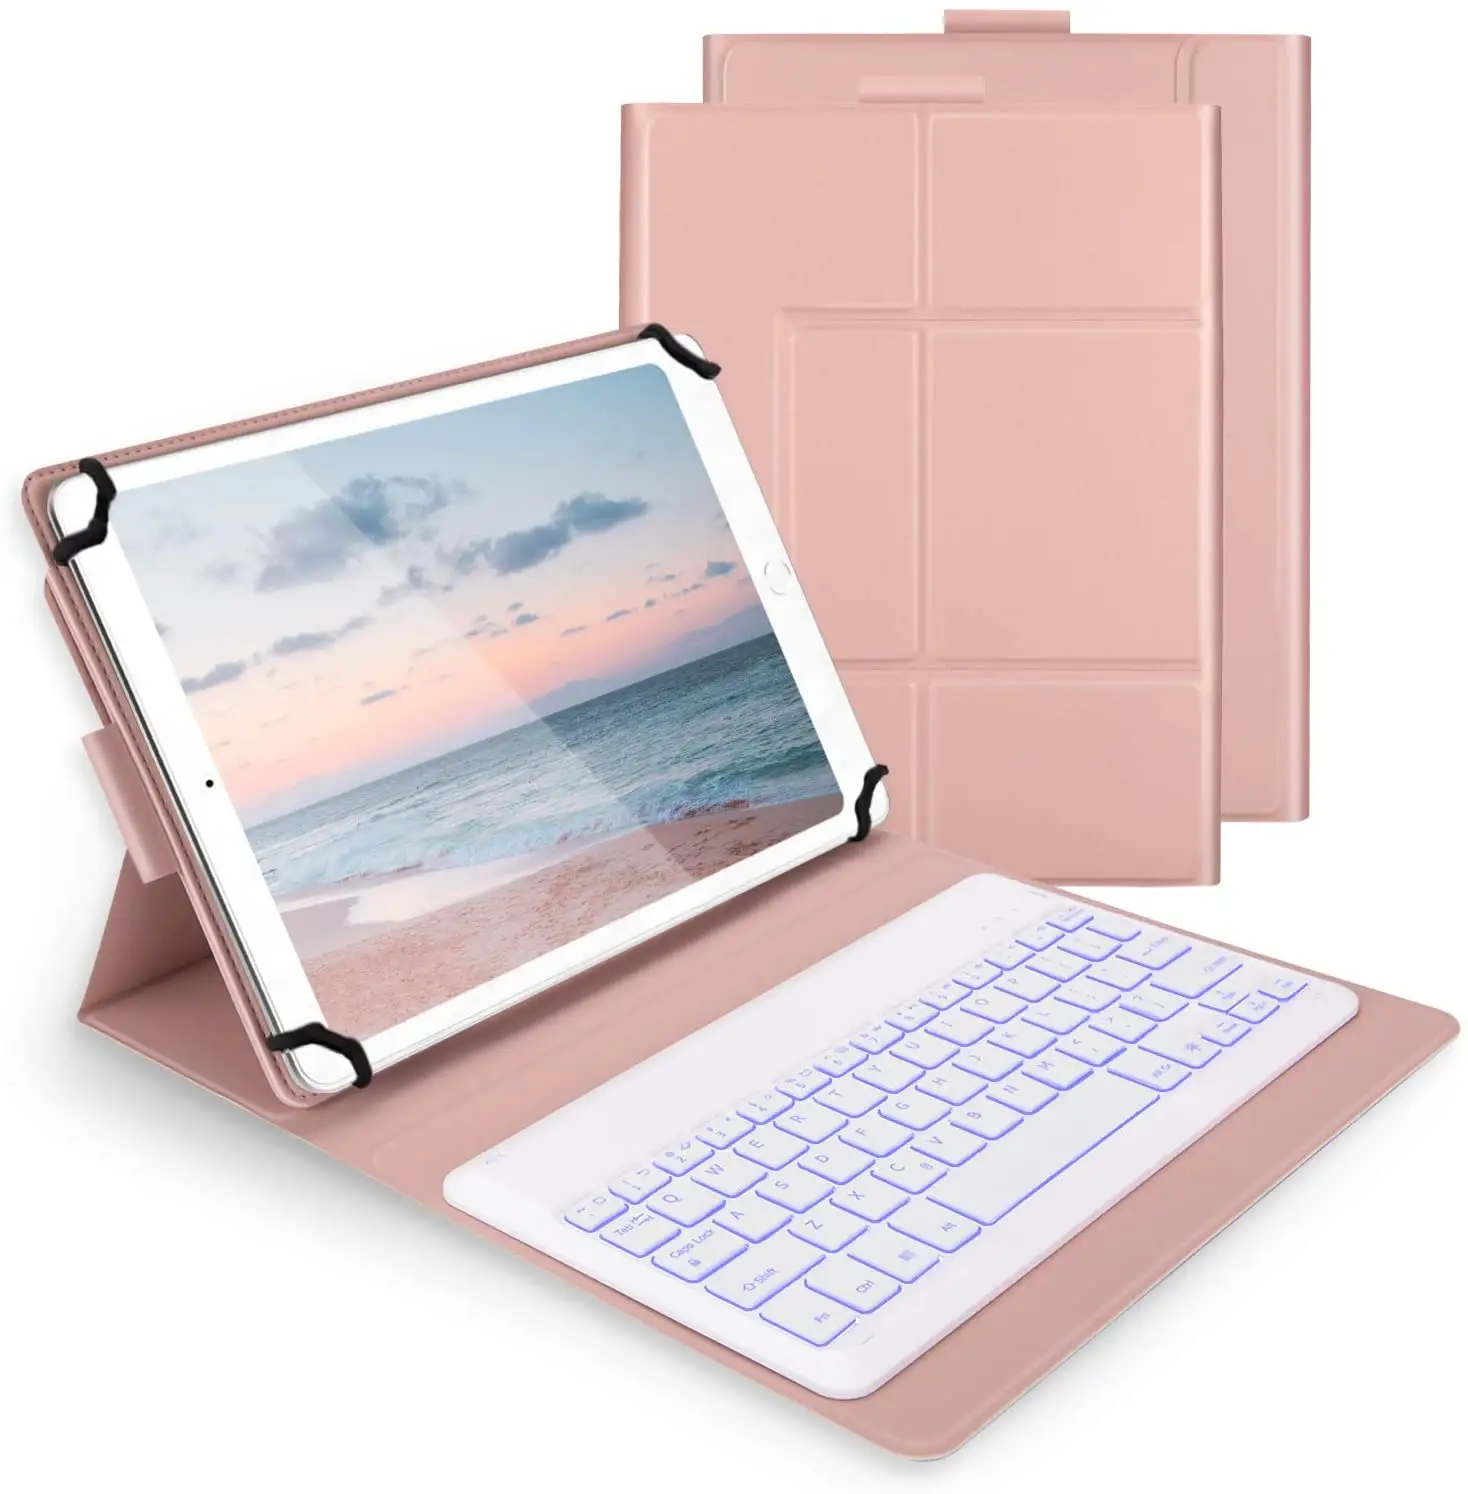 Universal 9-10.1 inch Tablet Keyboard Leather Case Wireless Detachable for iPad Samsung Huawei Kindle Devices